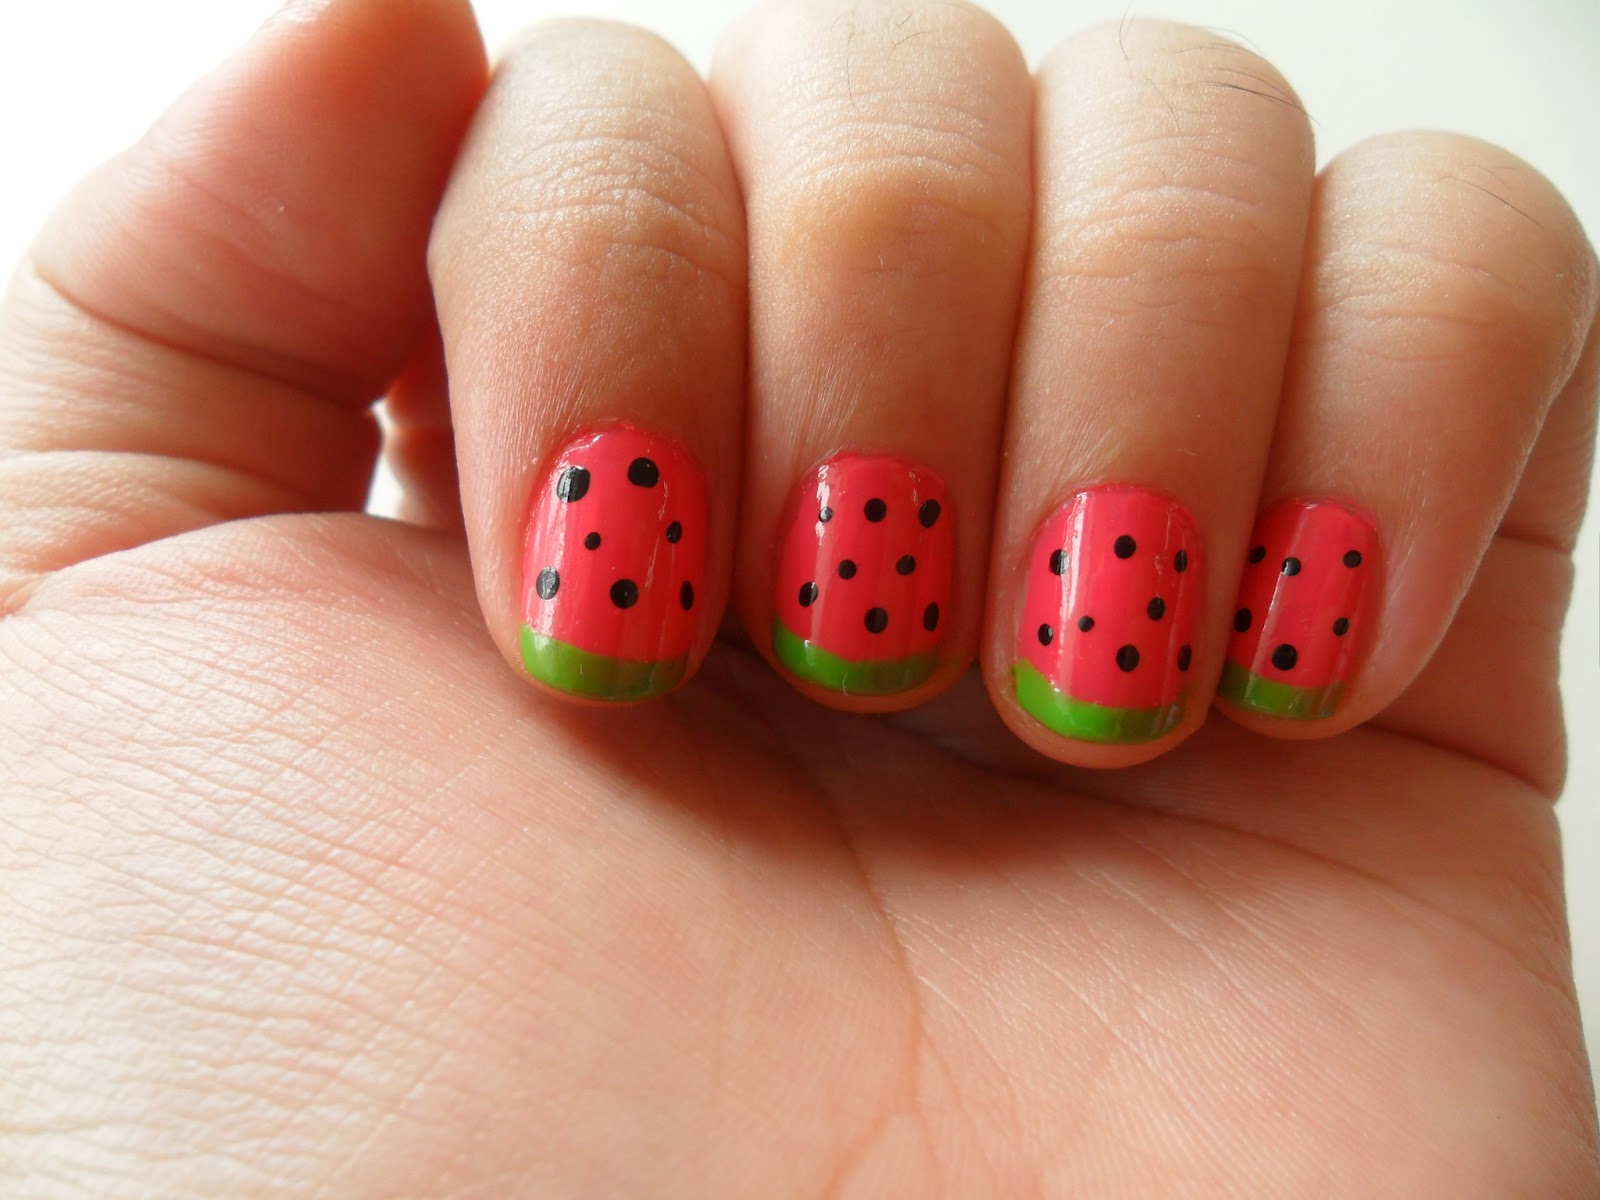 Watermelon Nail Art Designs for Short Nails - wide 4